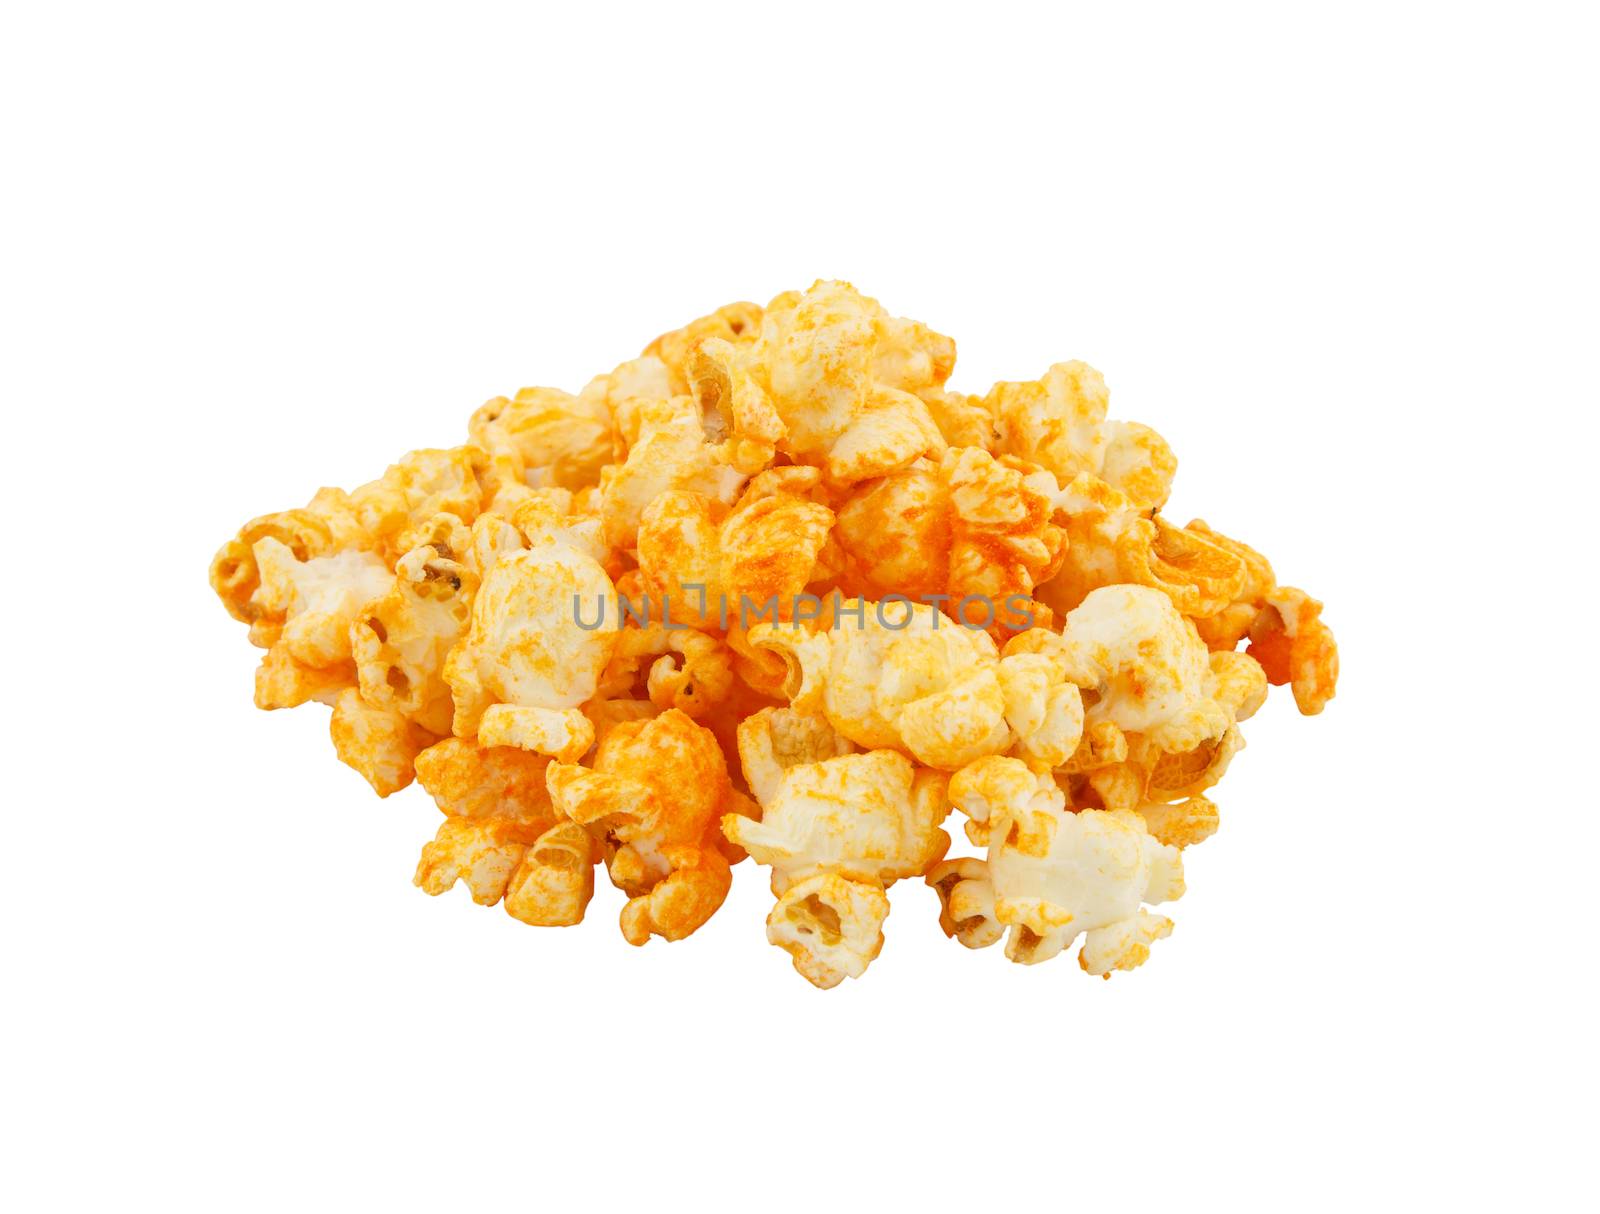 Cheese popcorn isolated on the white background